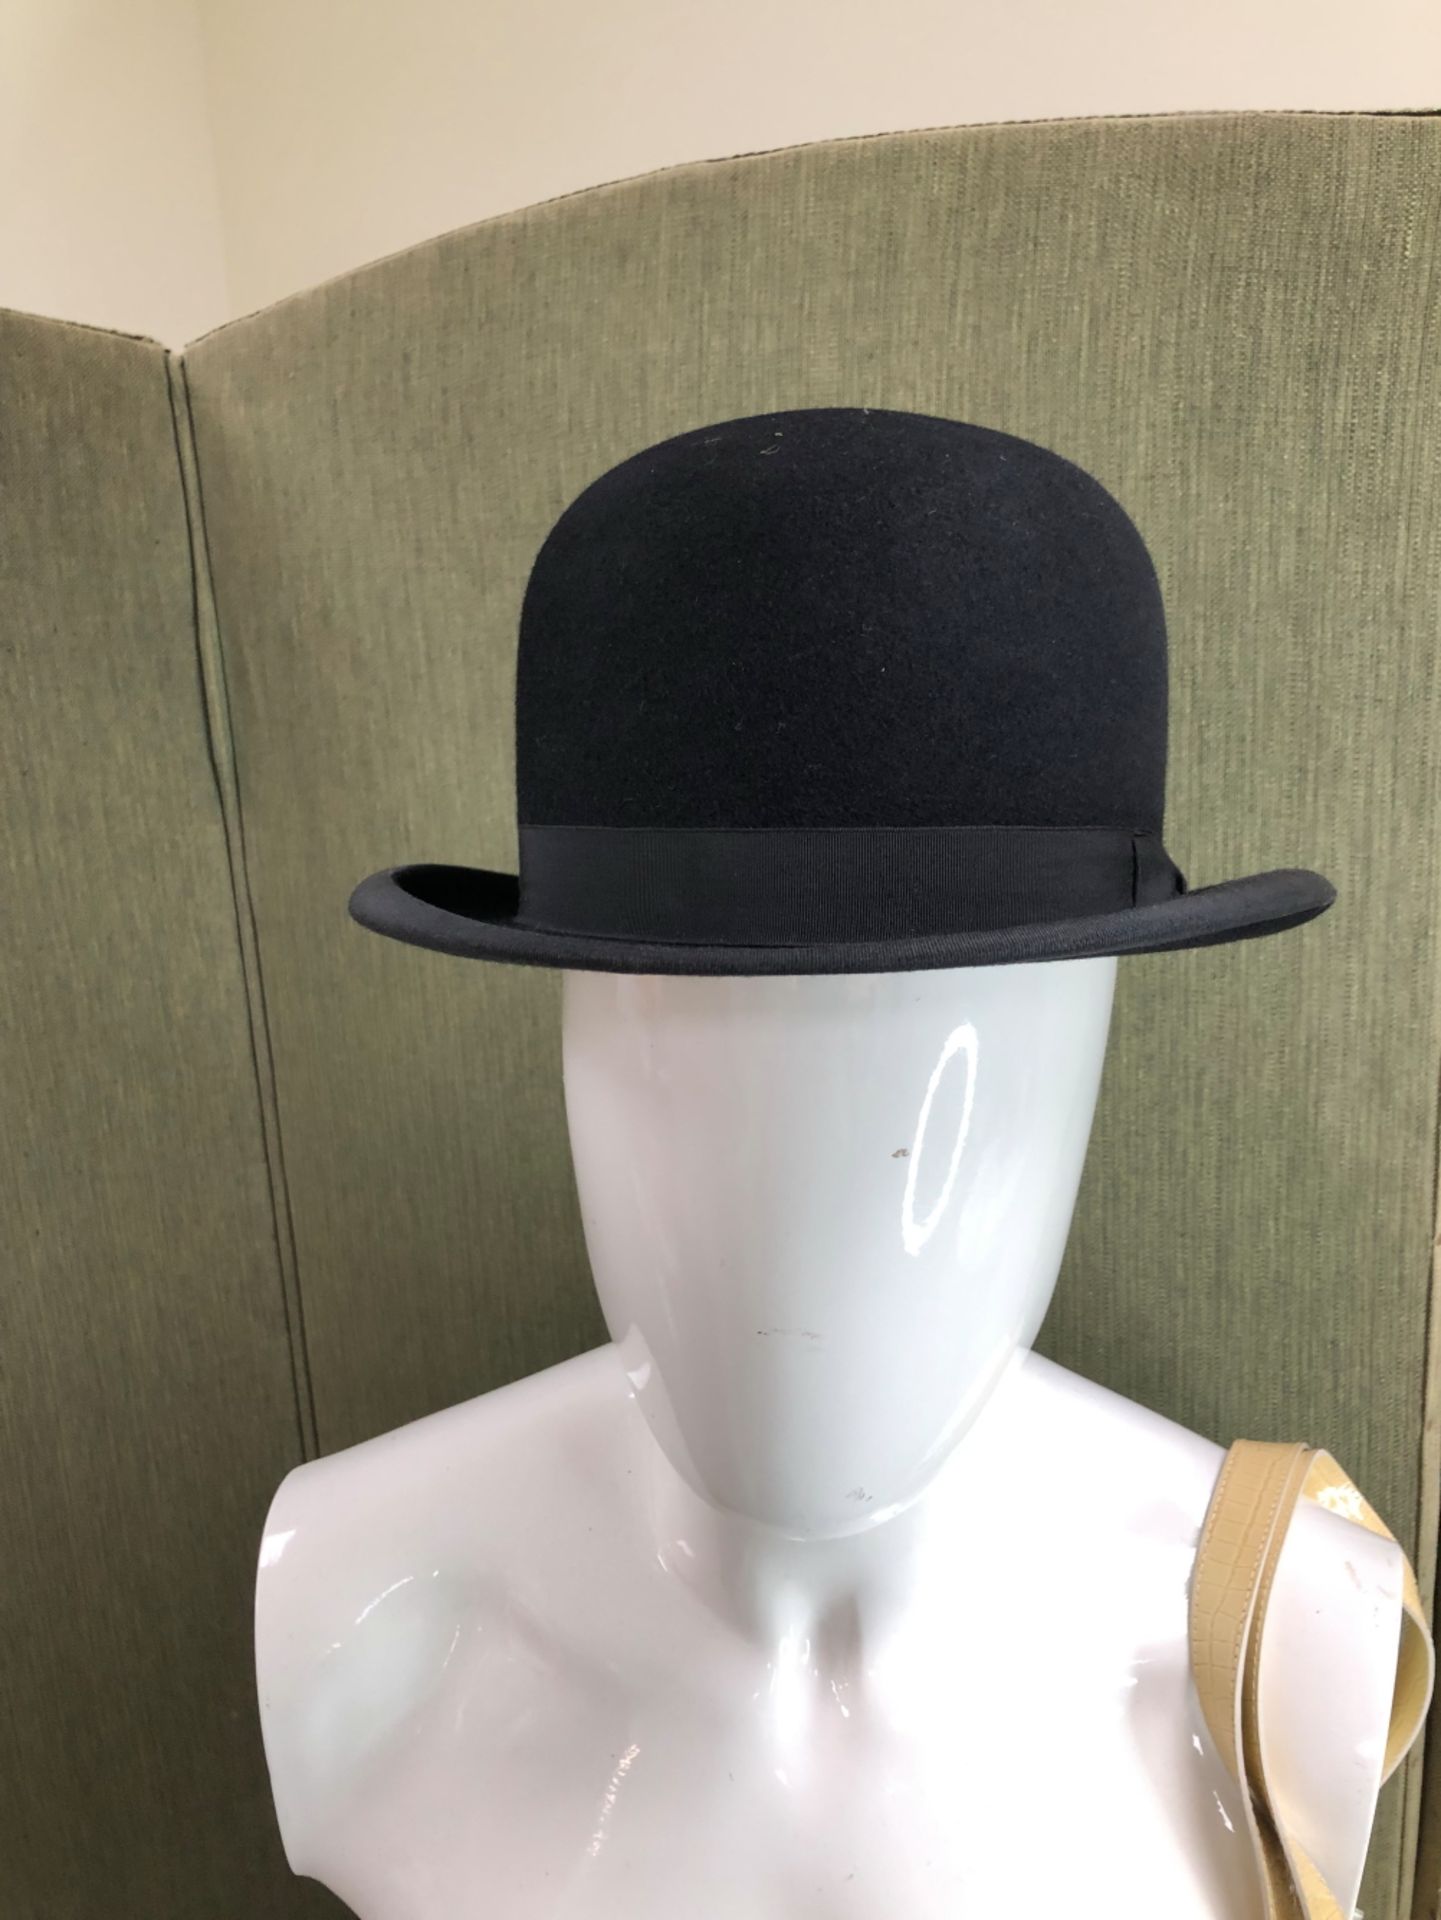 A GIRLS BOATER HAT "THE RIDGMONT", TOGETHER WITH A HEPSWORTH BOWLER HAT SIZE 71/8 AND A AS NEW - Image 4 of 10